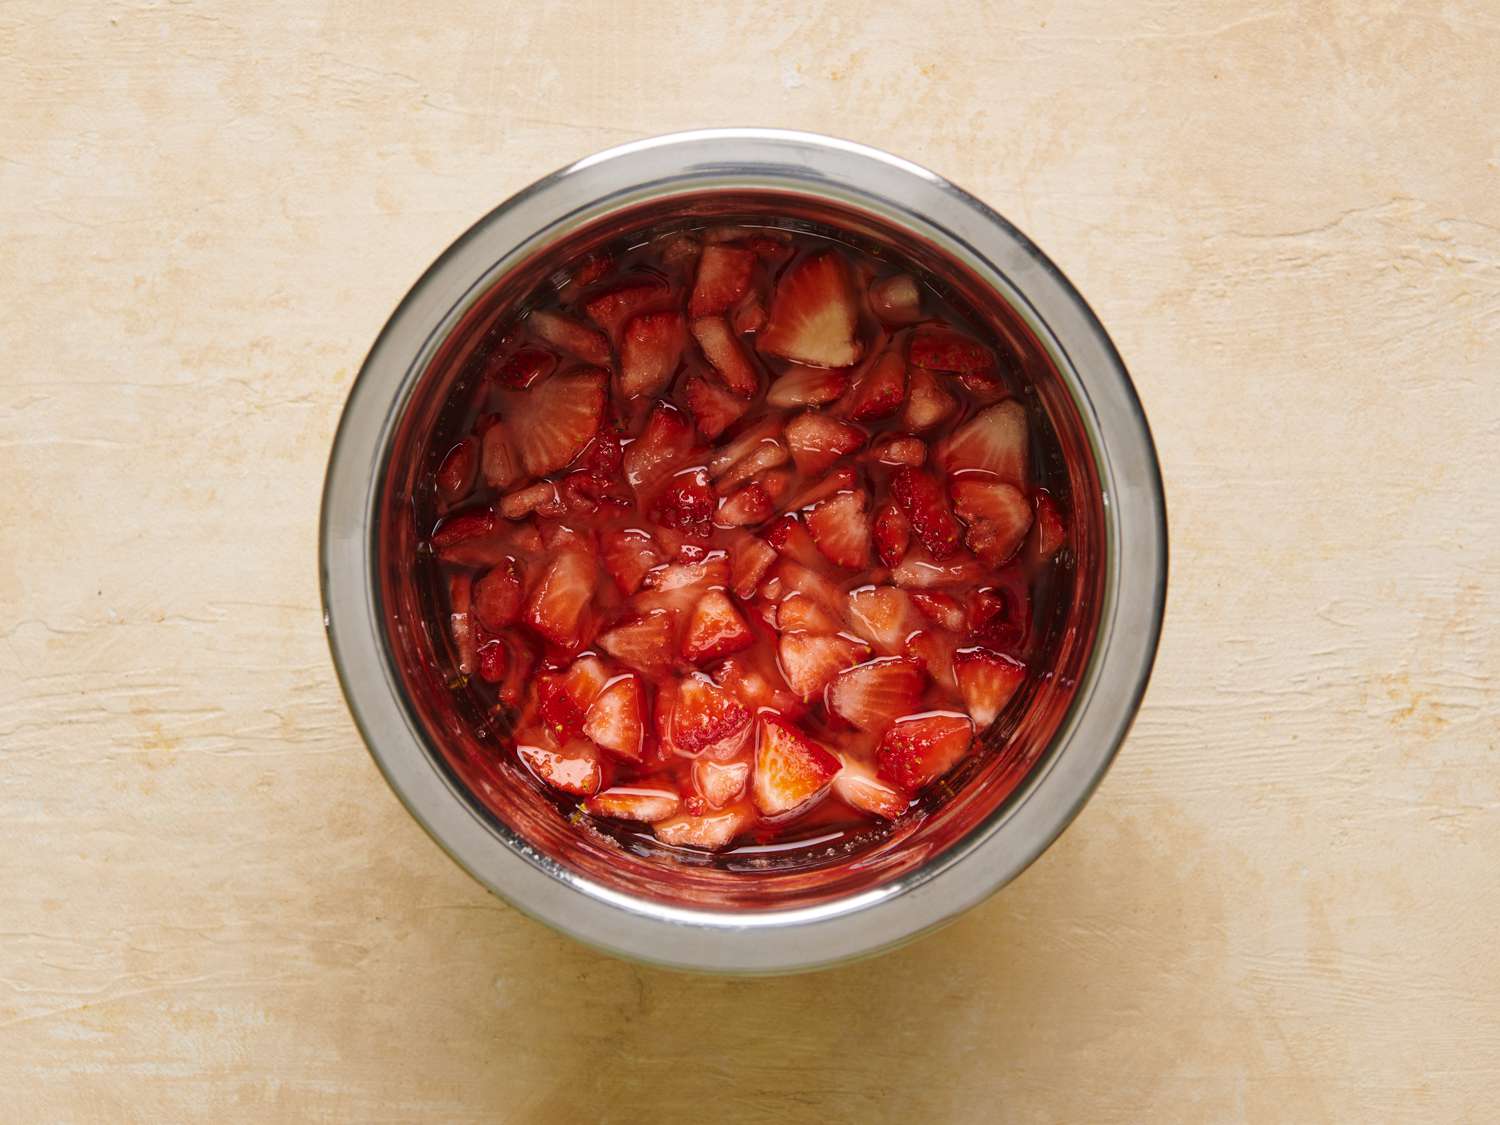 Quartered strawberries, Â½ cup of sugar, and alcohol combined in a non-reactive mixing bowl.